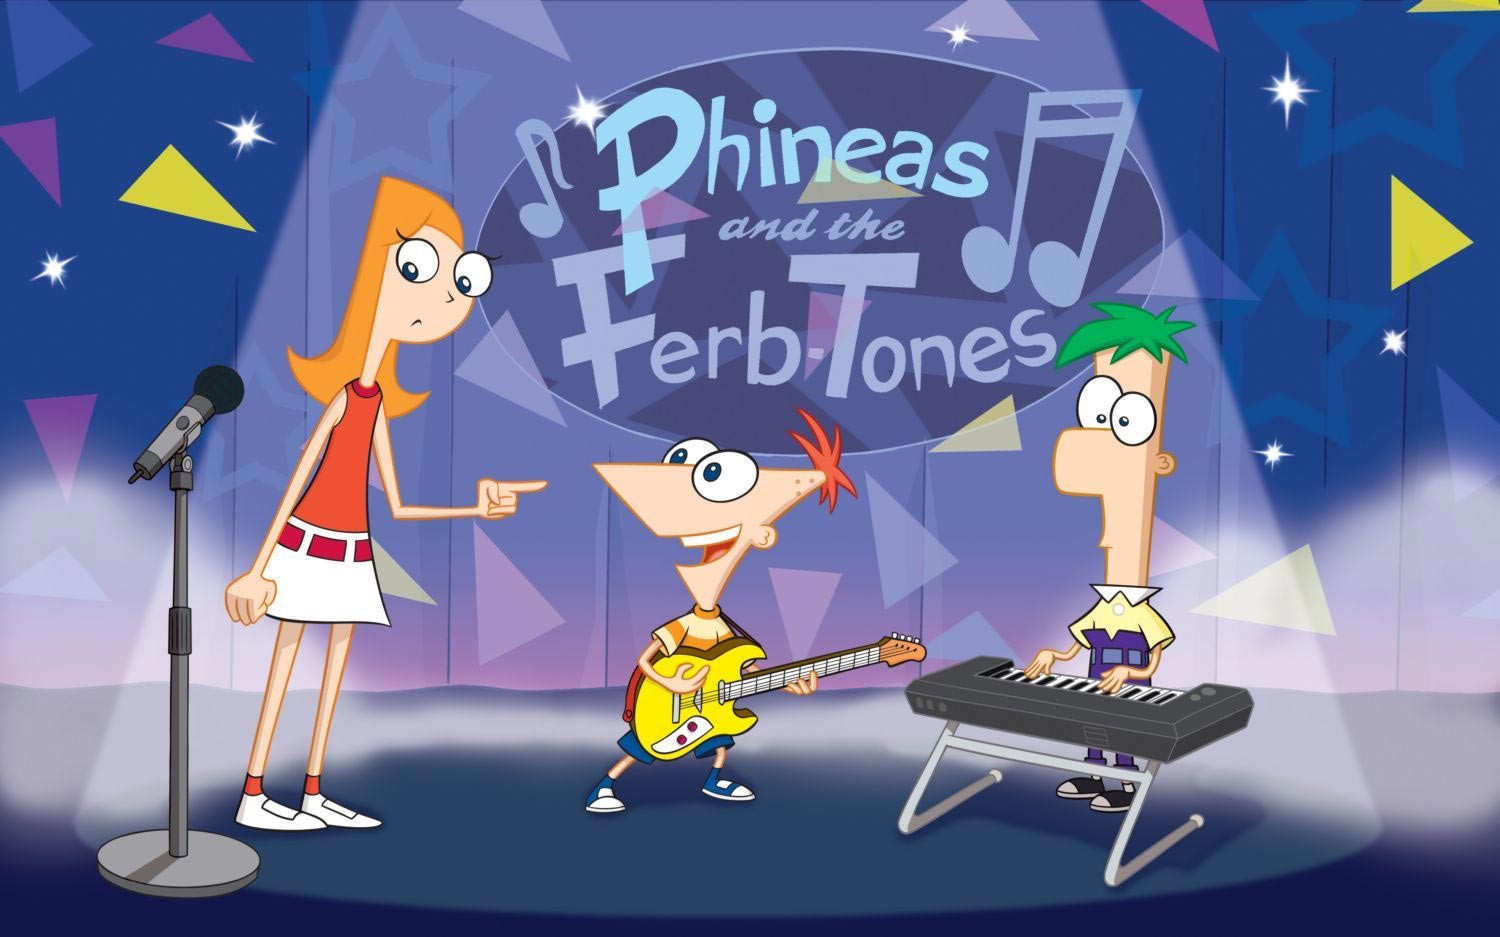 Phineas And Ferb Image HD Wallpaper Background